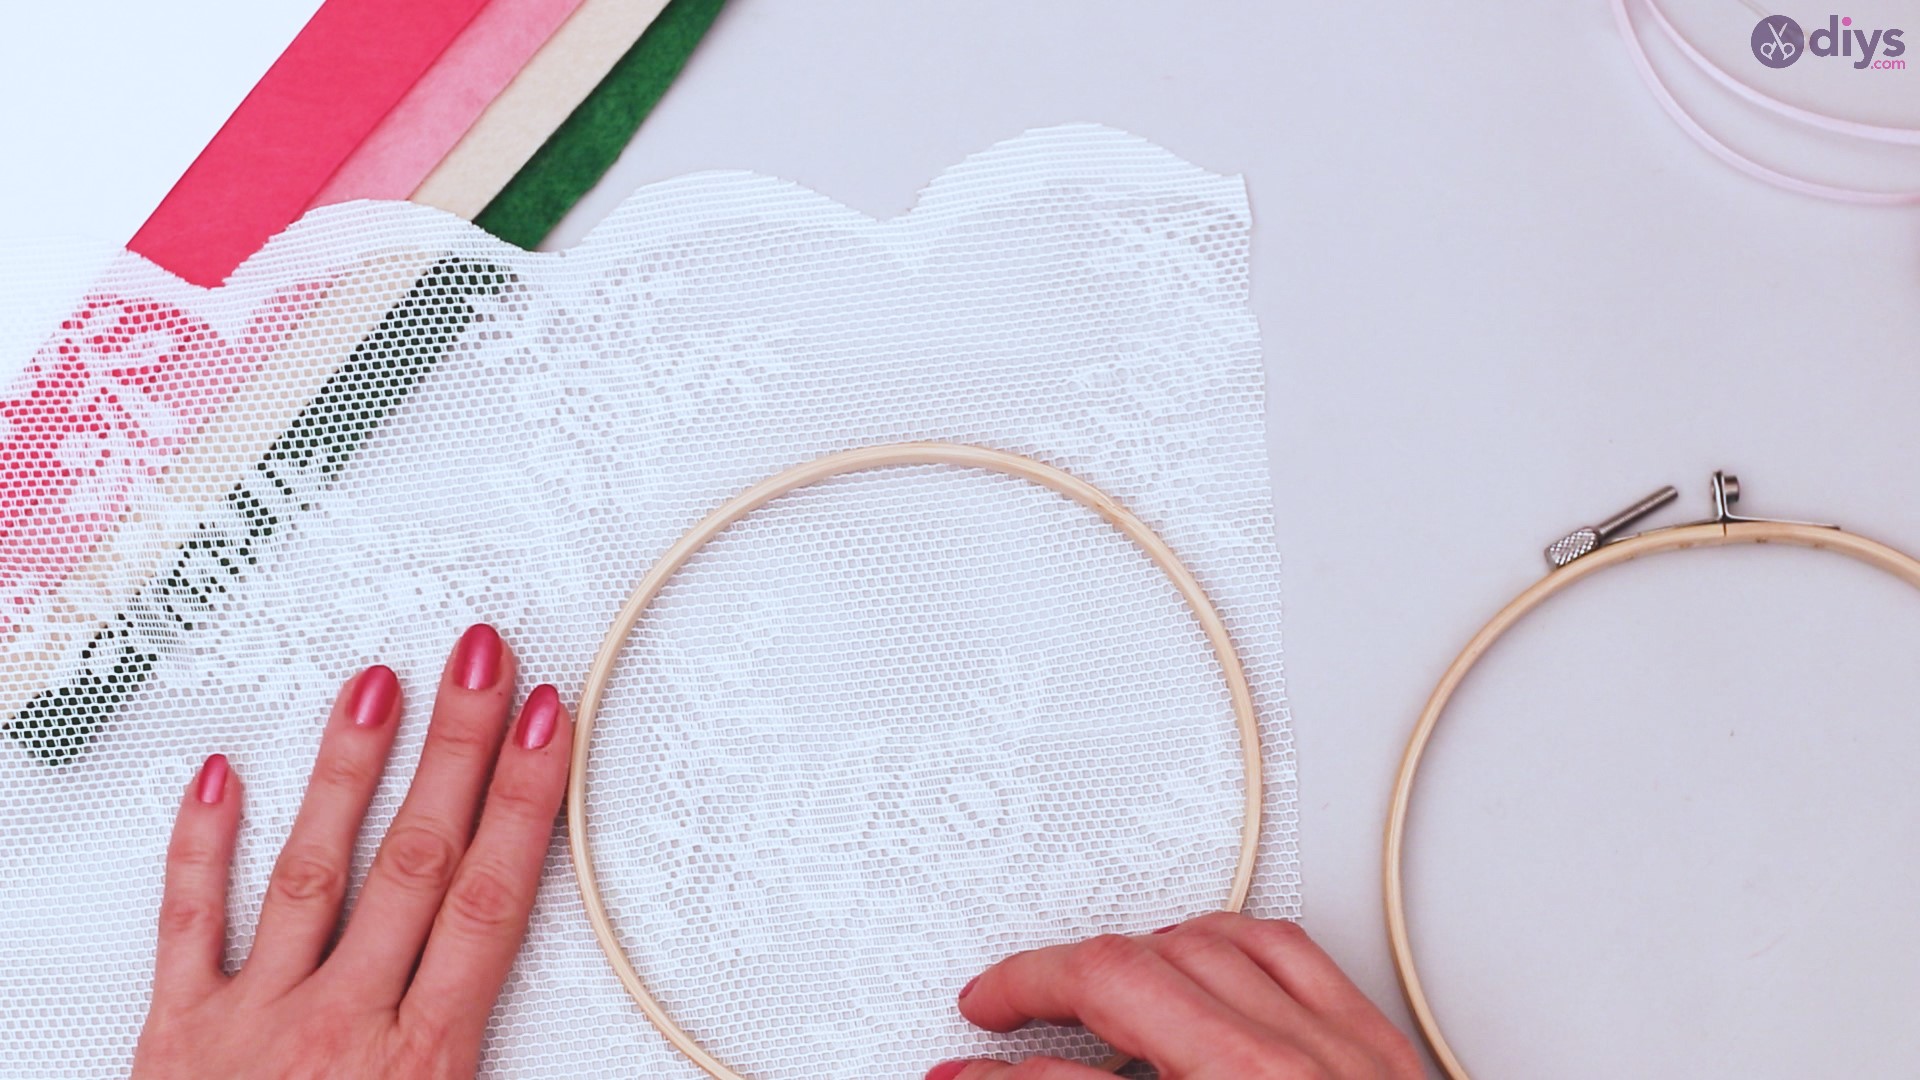 Diy embroidery hoop wall decor tutorial step by step (2)